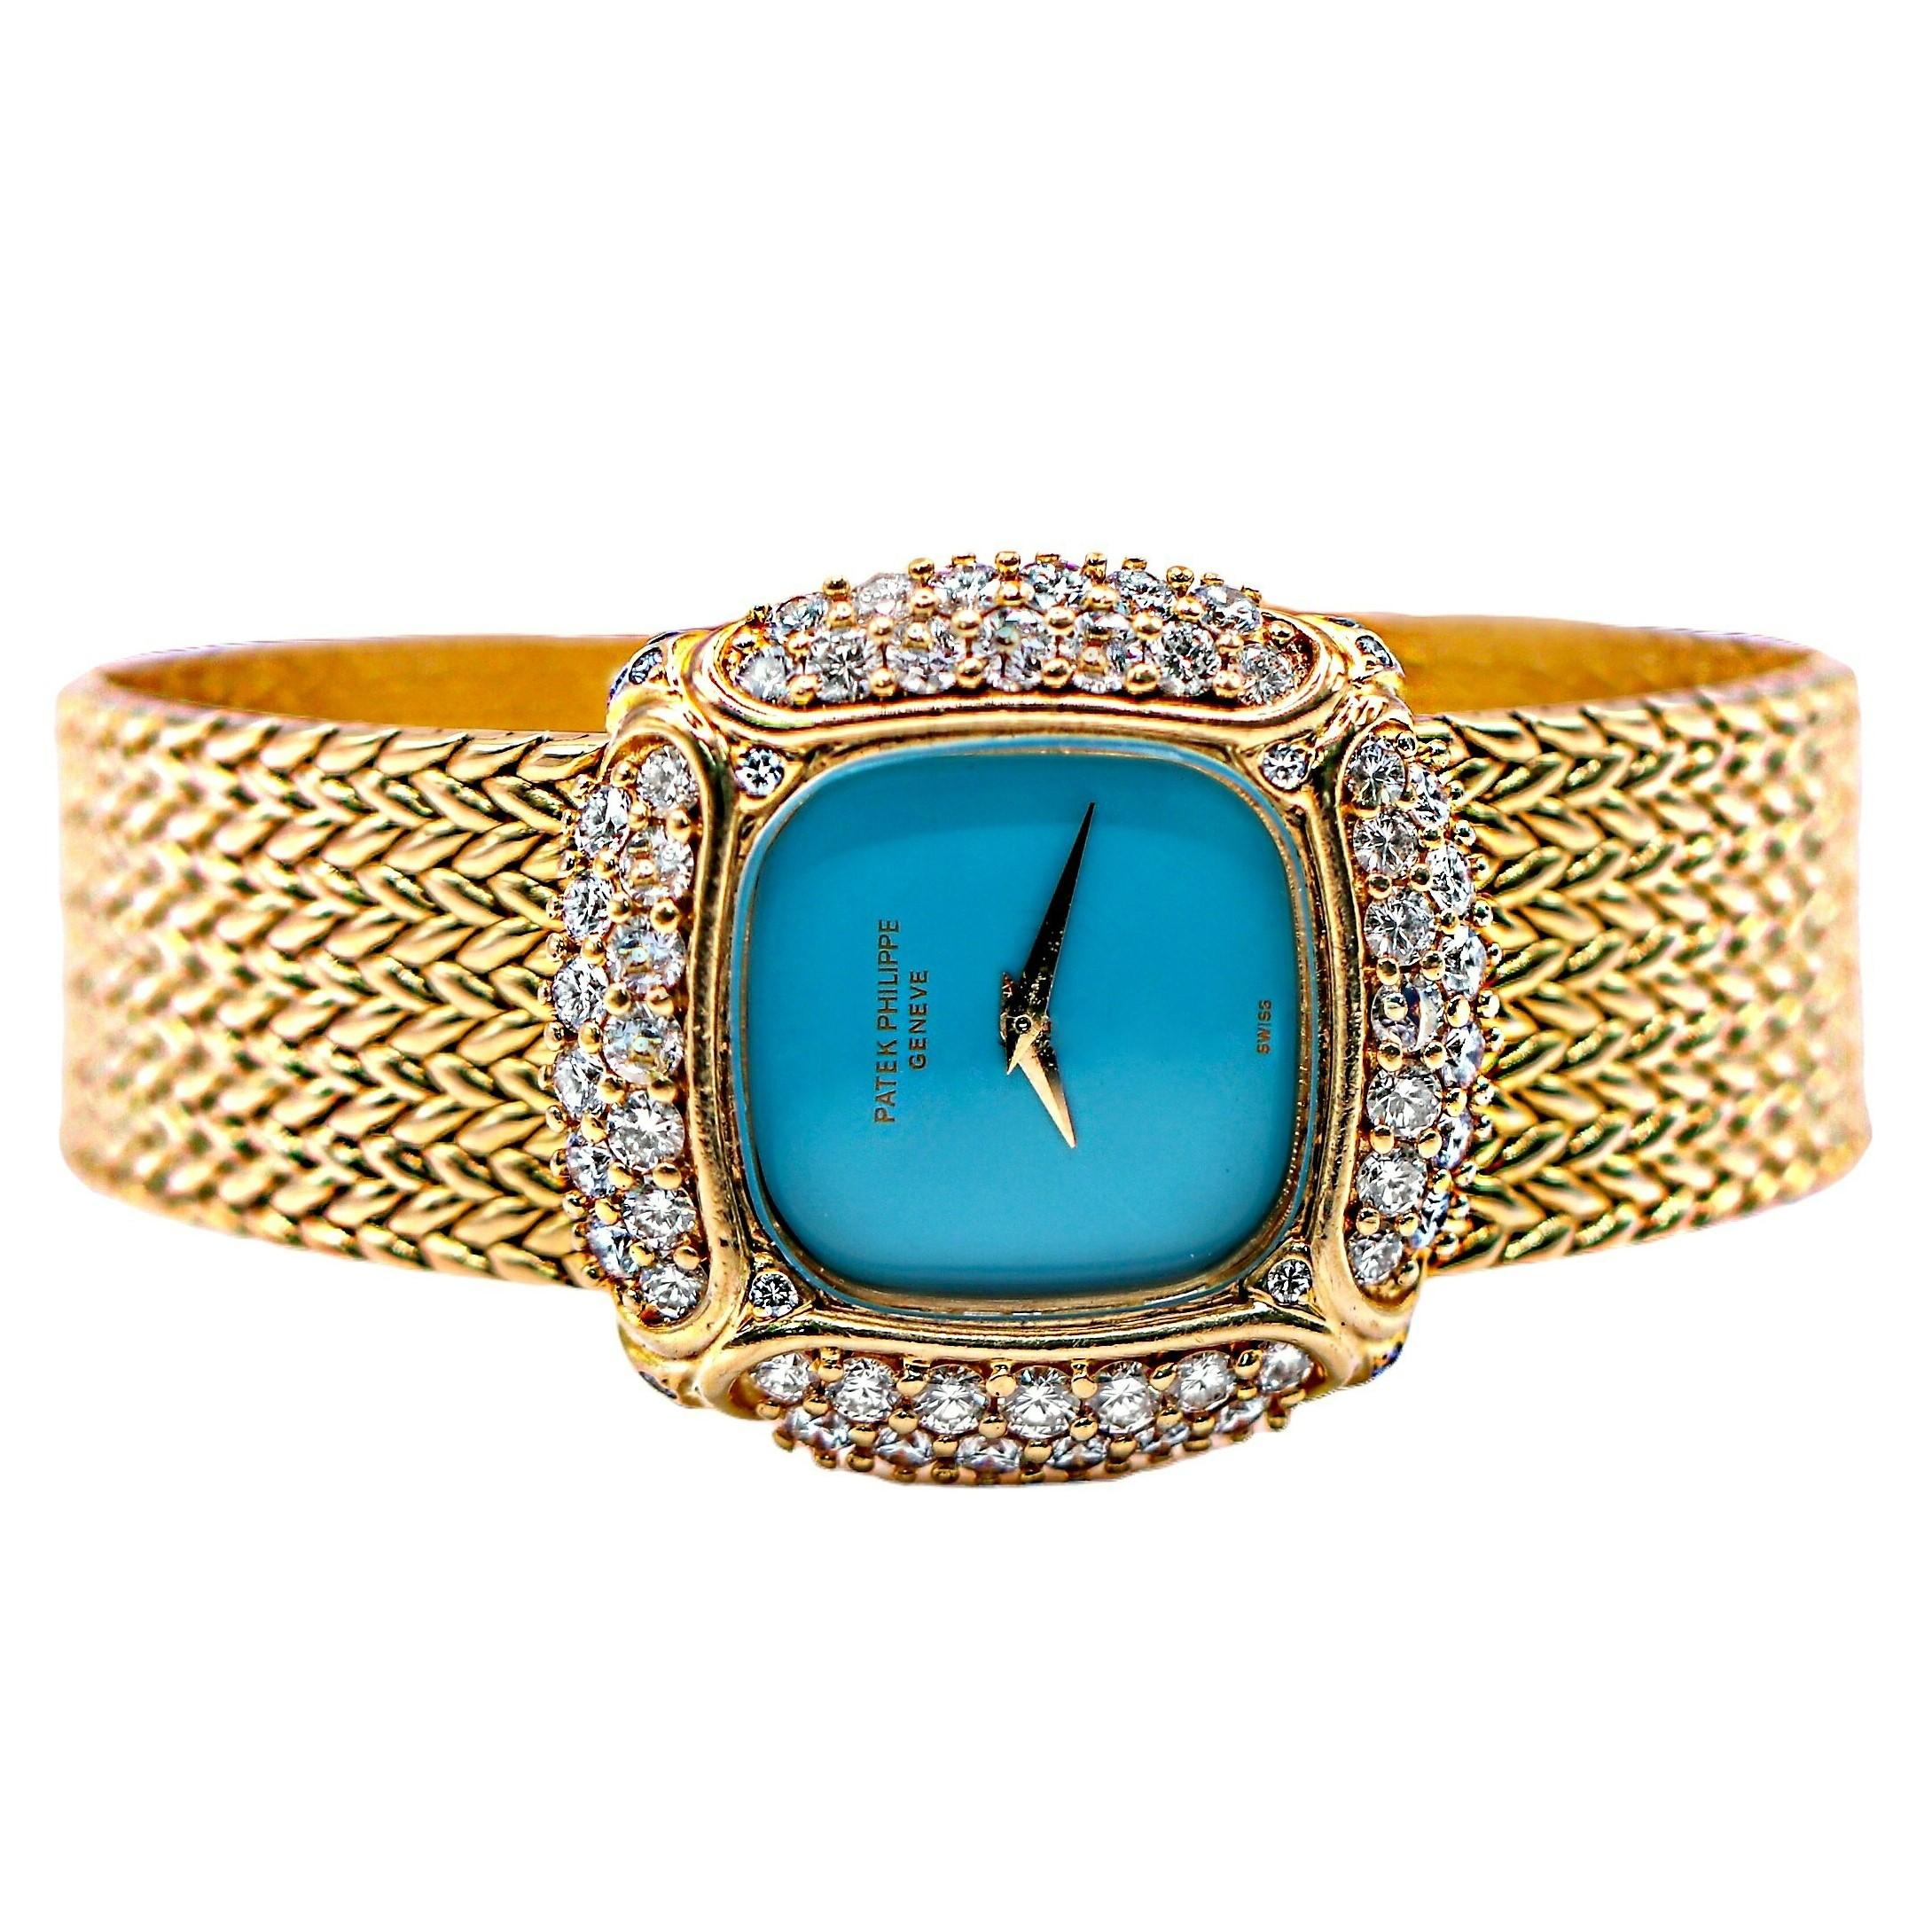 One of the world's most highly esteemed houses, Patek Philippe, created this luxurious timepiece at some  time in the late 20th century. With it's sky blue turquoise dial surrounded by a heavily diamond encrusted cushion shaped bezel and with a